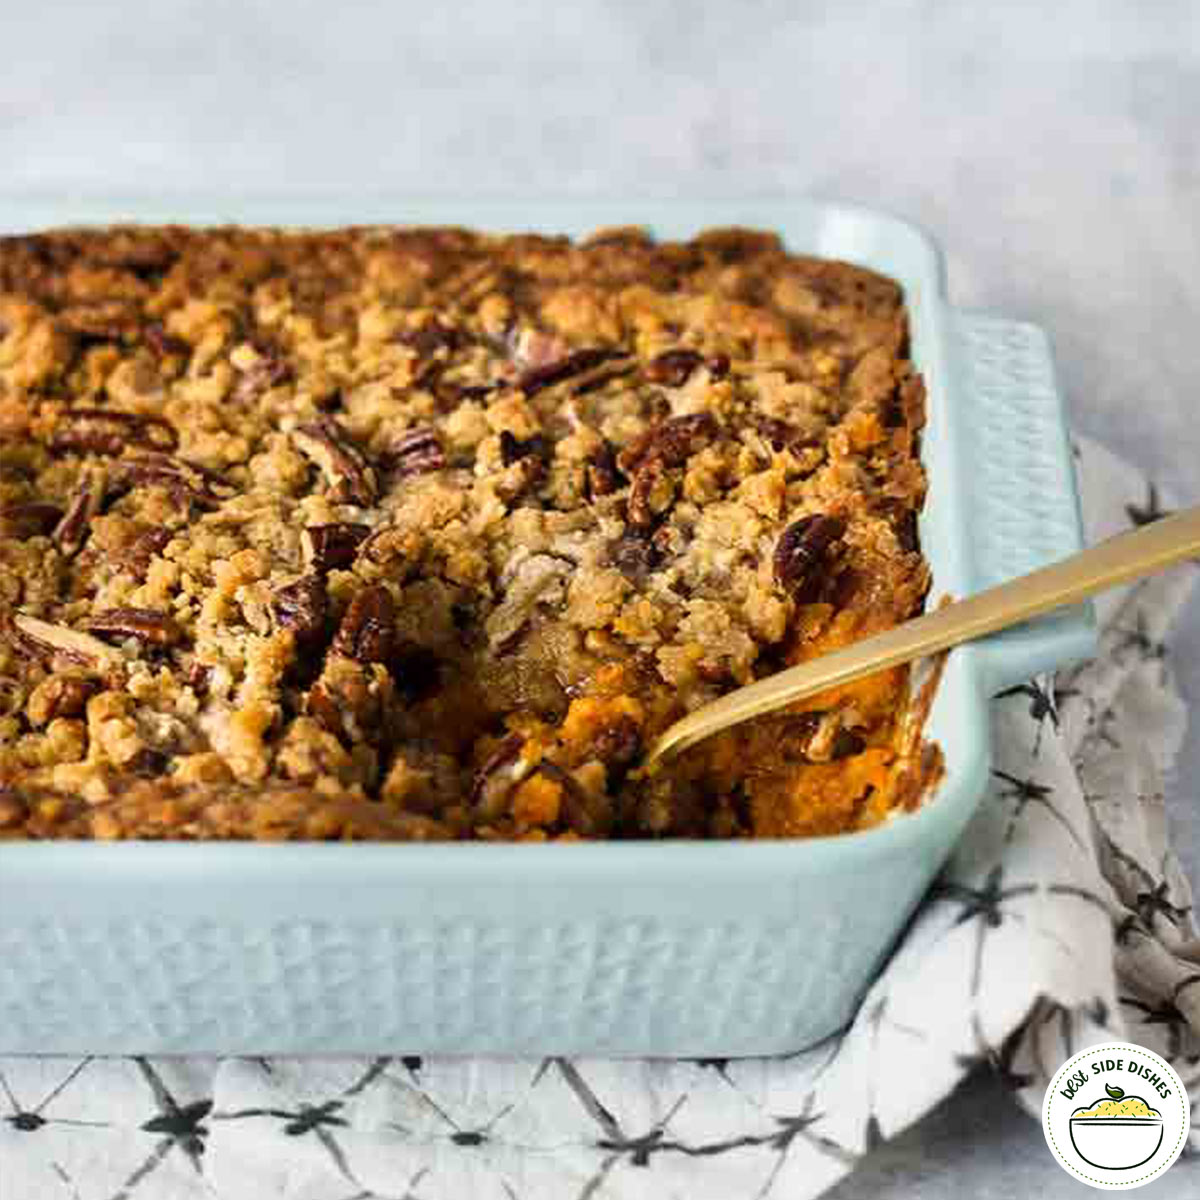 Sweet potato casserole in a light blue dish with a wooden spoon